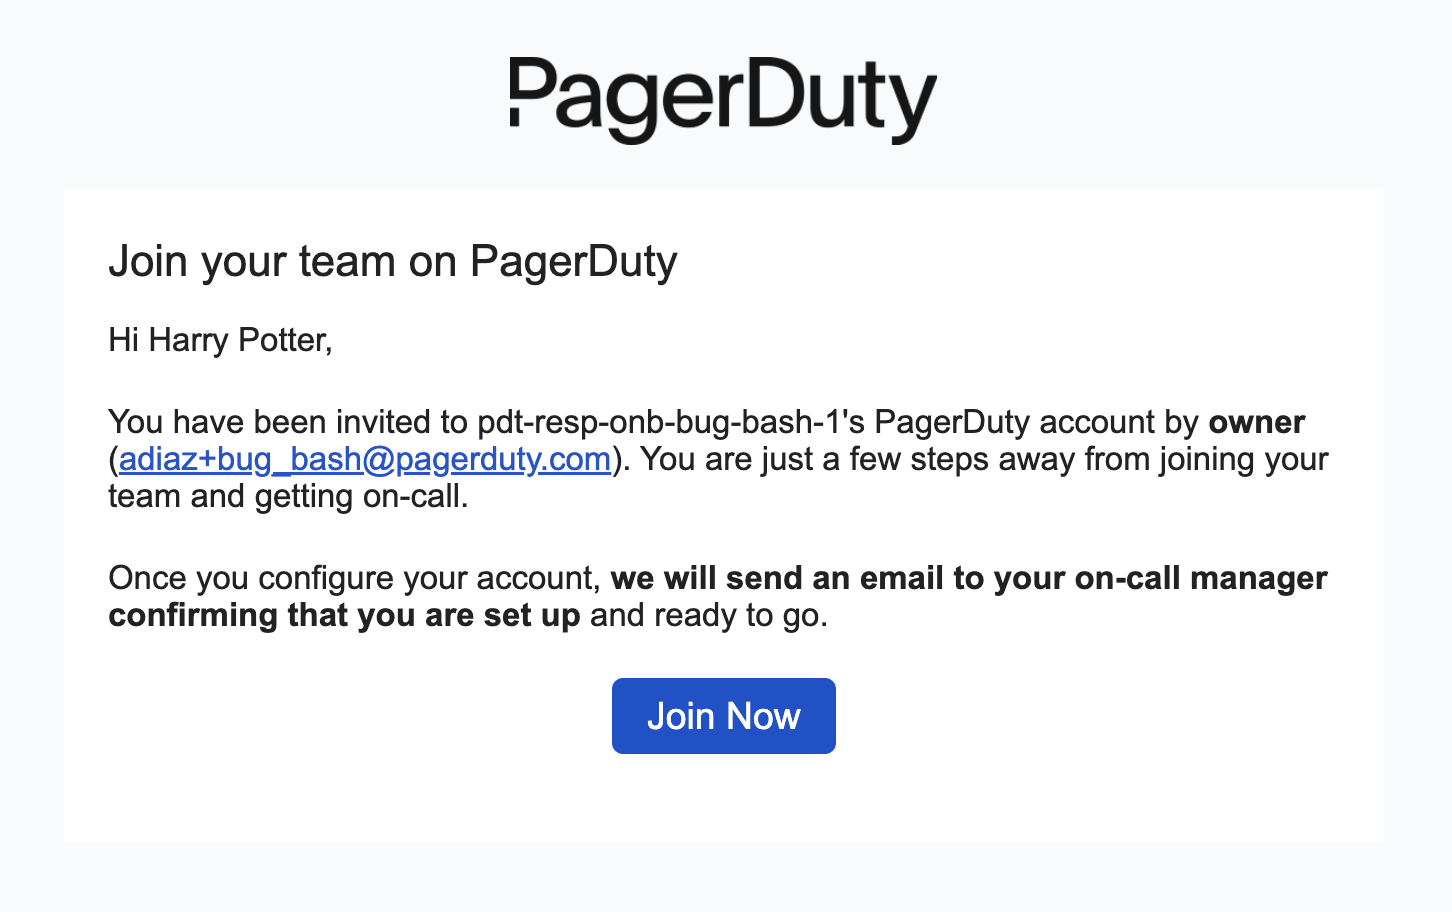 Screenshot of the welcome email to new users, prompting them to join PagerDuty.